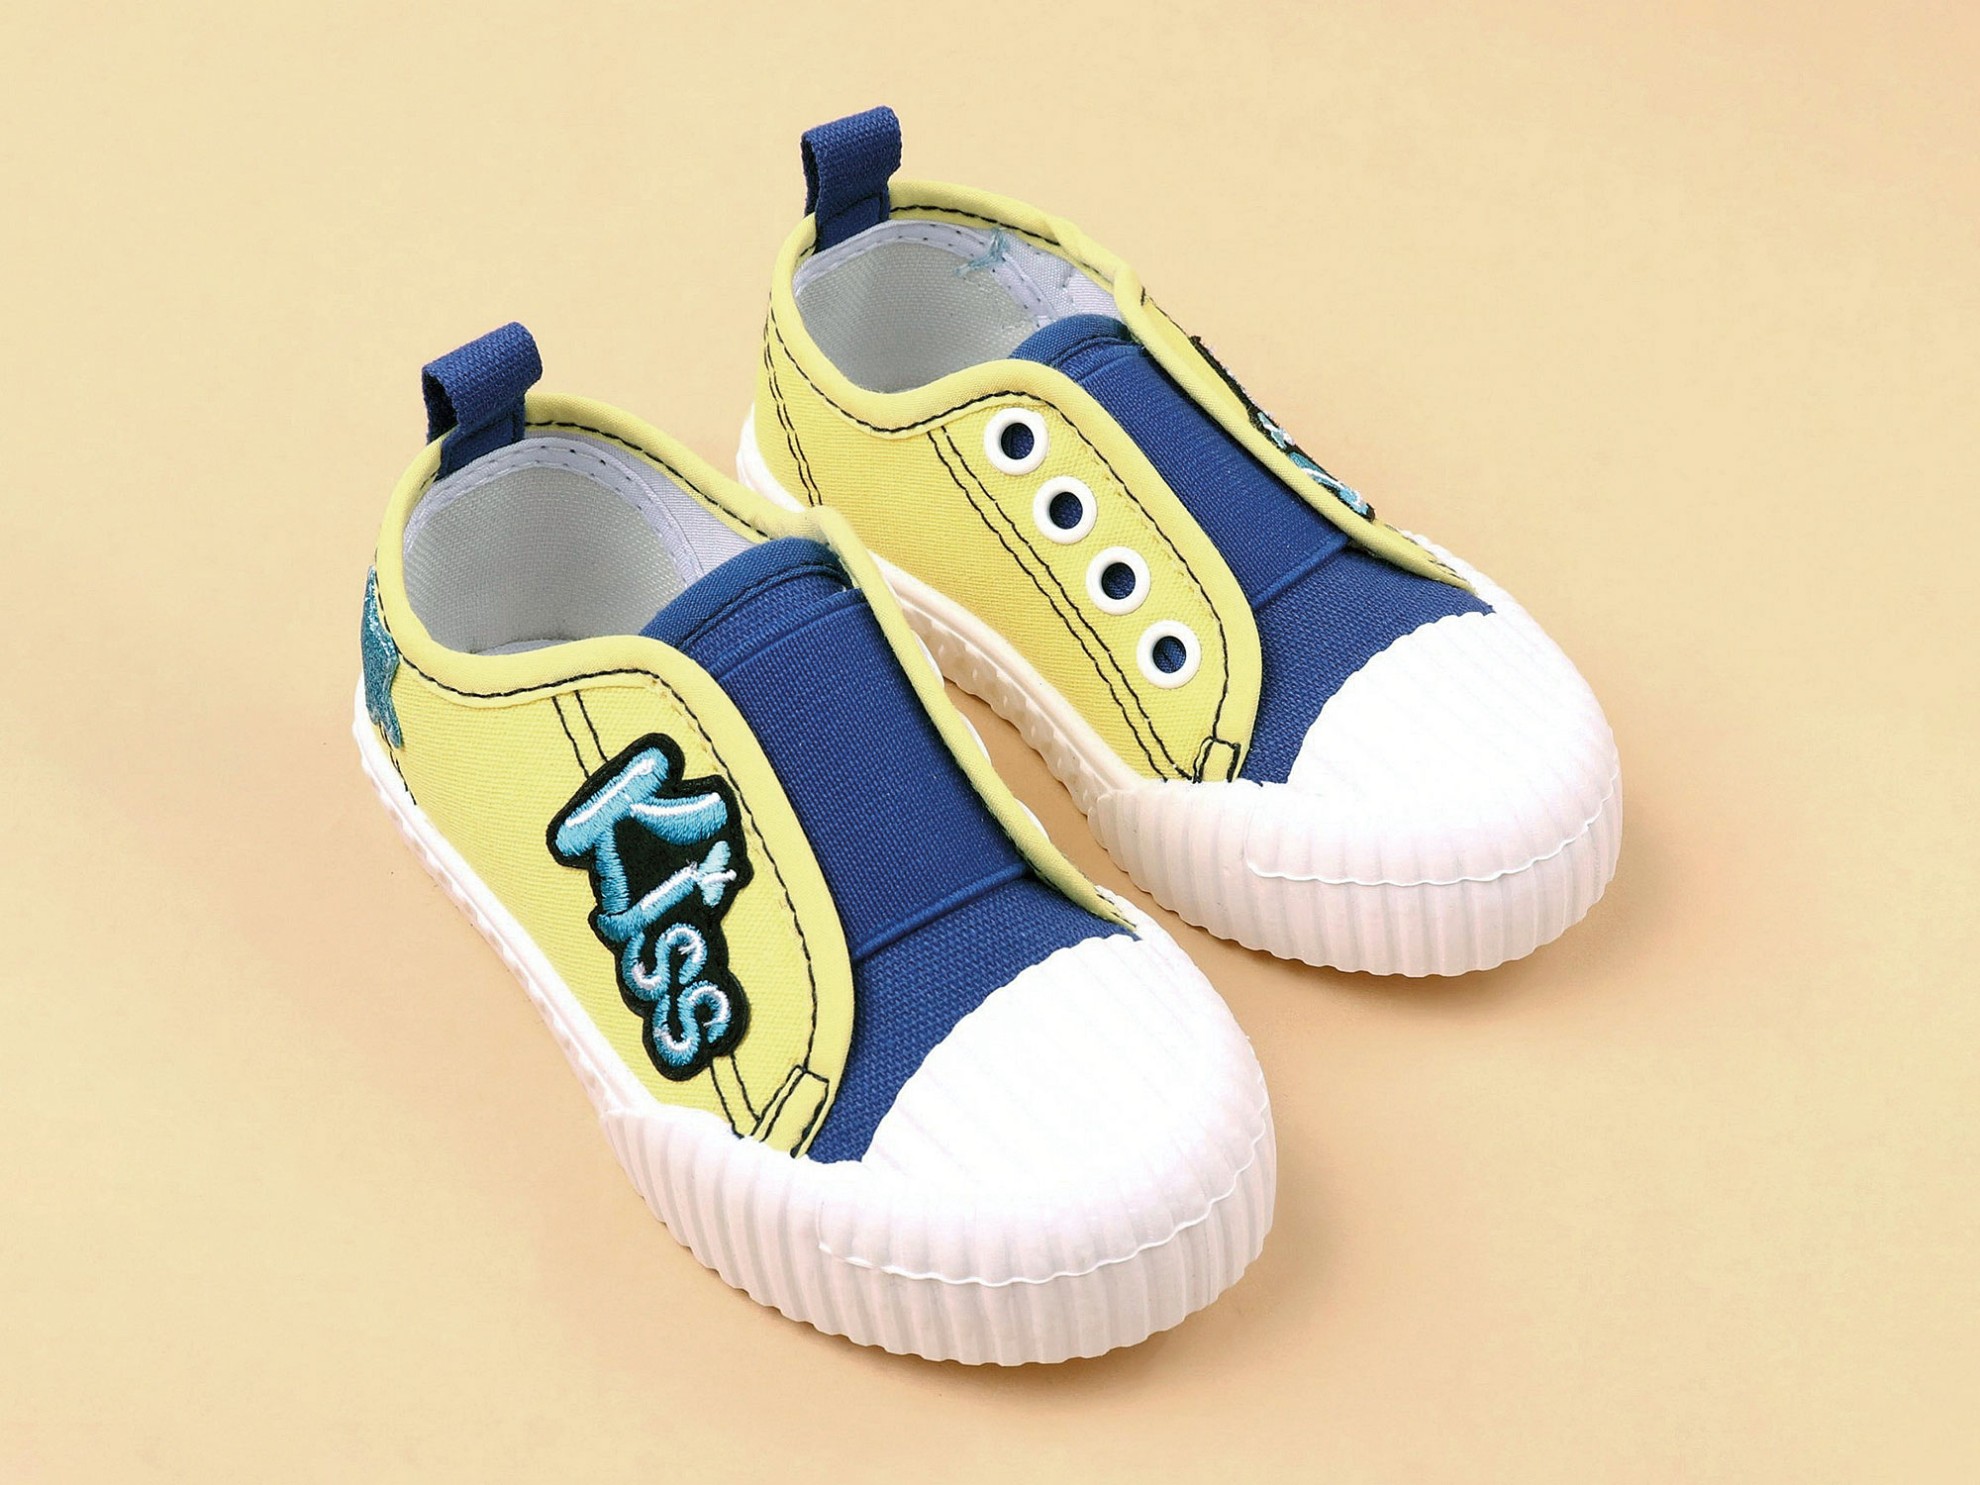 Closed children's shoes: comfortable and fun